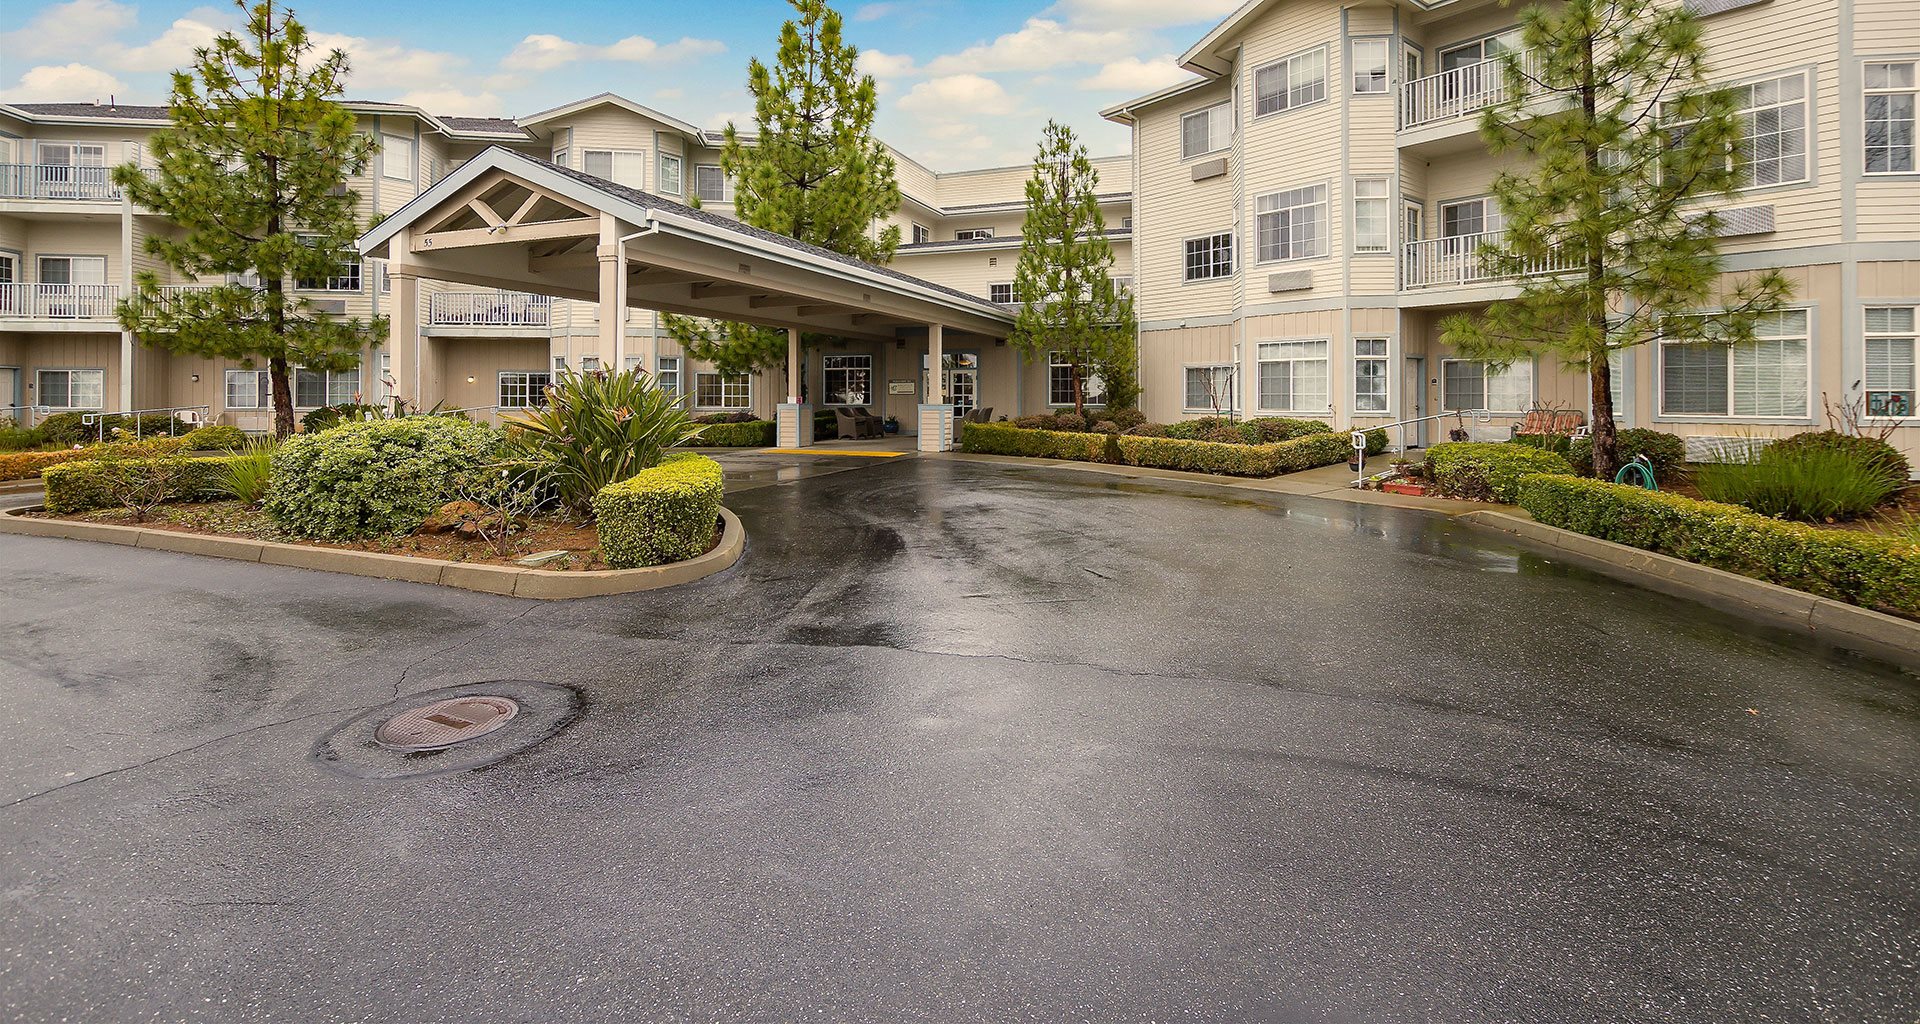 Exquisite Exterior at Pacifica Senior Living Country Crest, Oroville, CA